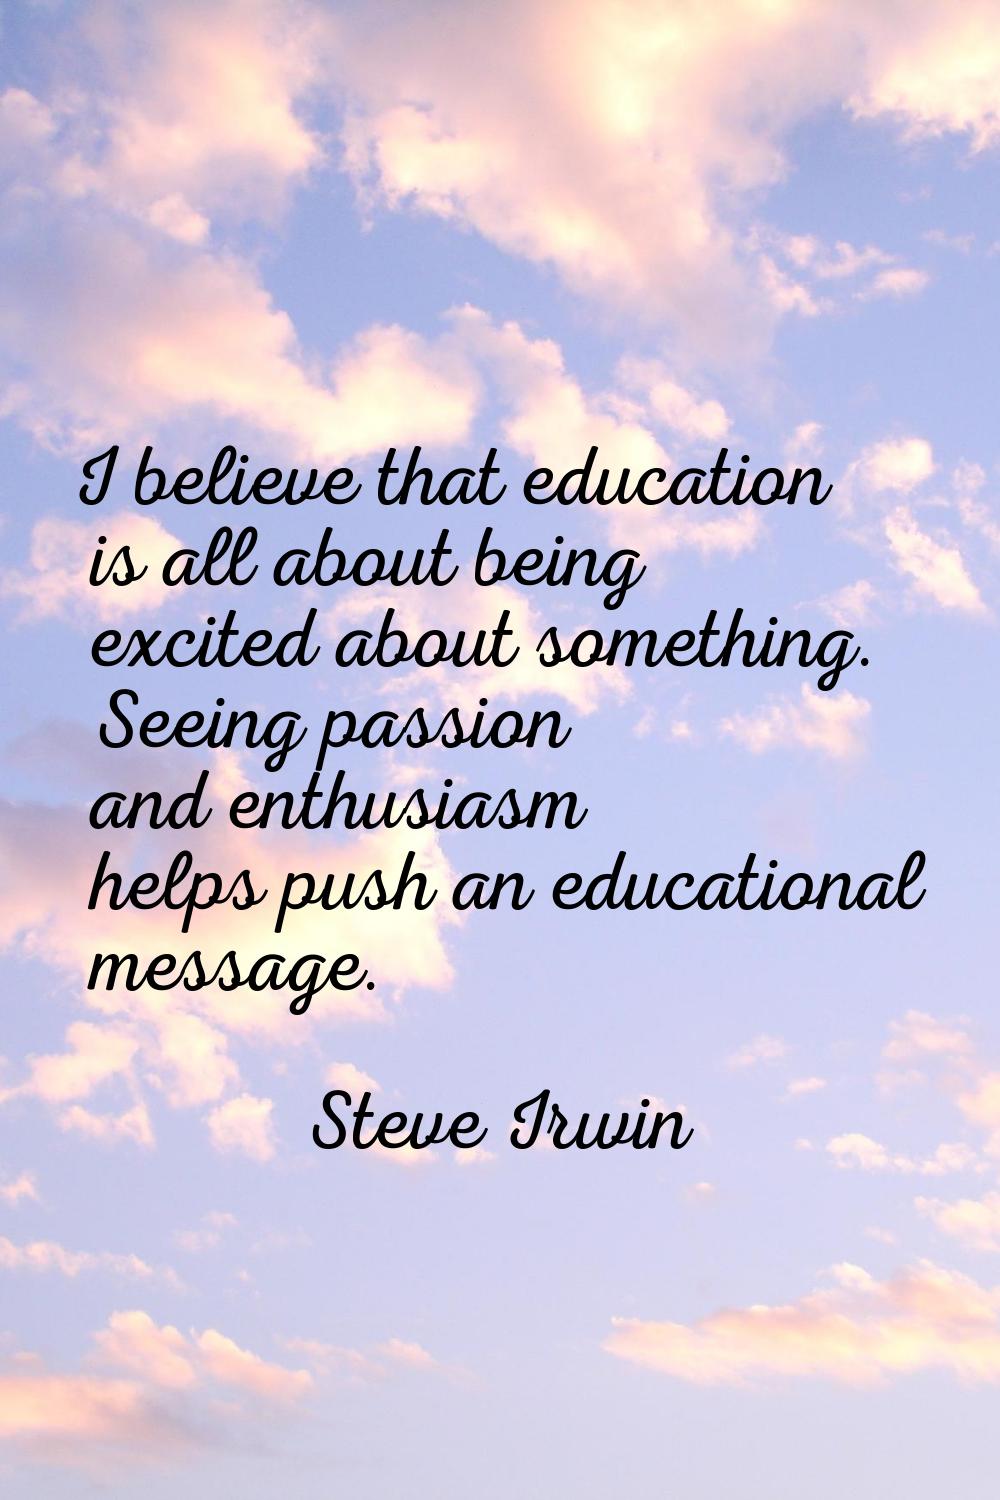 I believe that education is all about being excited about something. Seeing passion and enthusiasm 